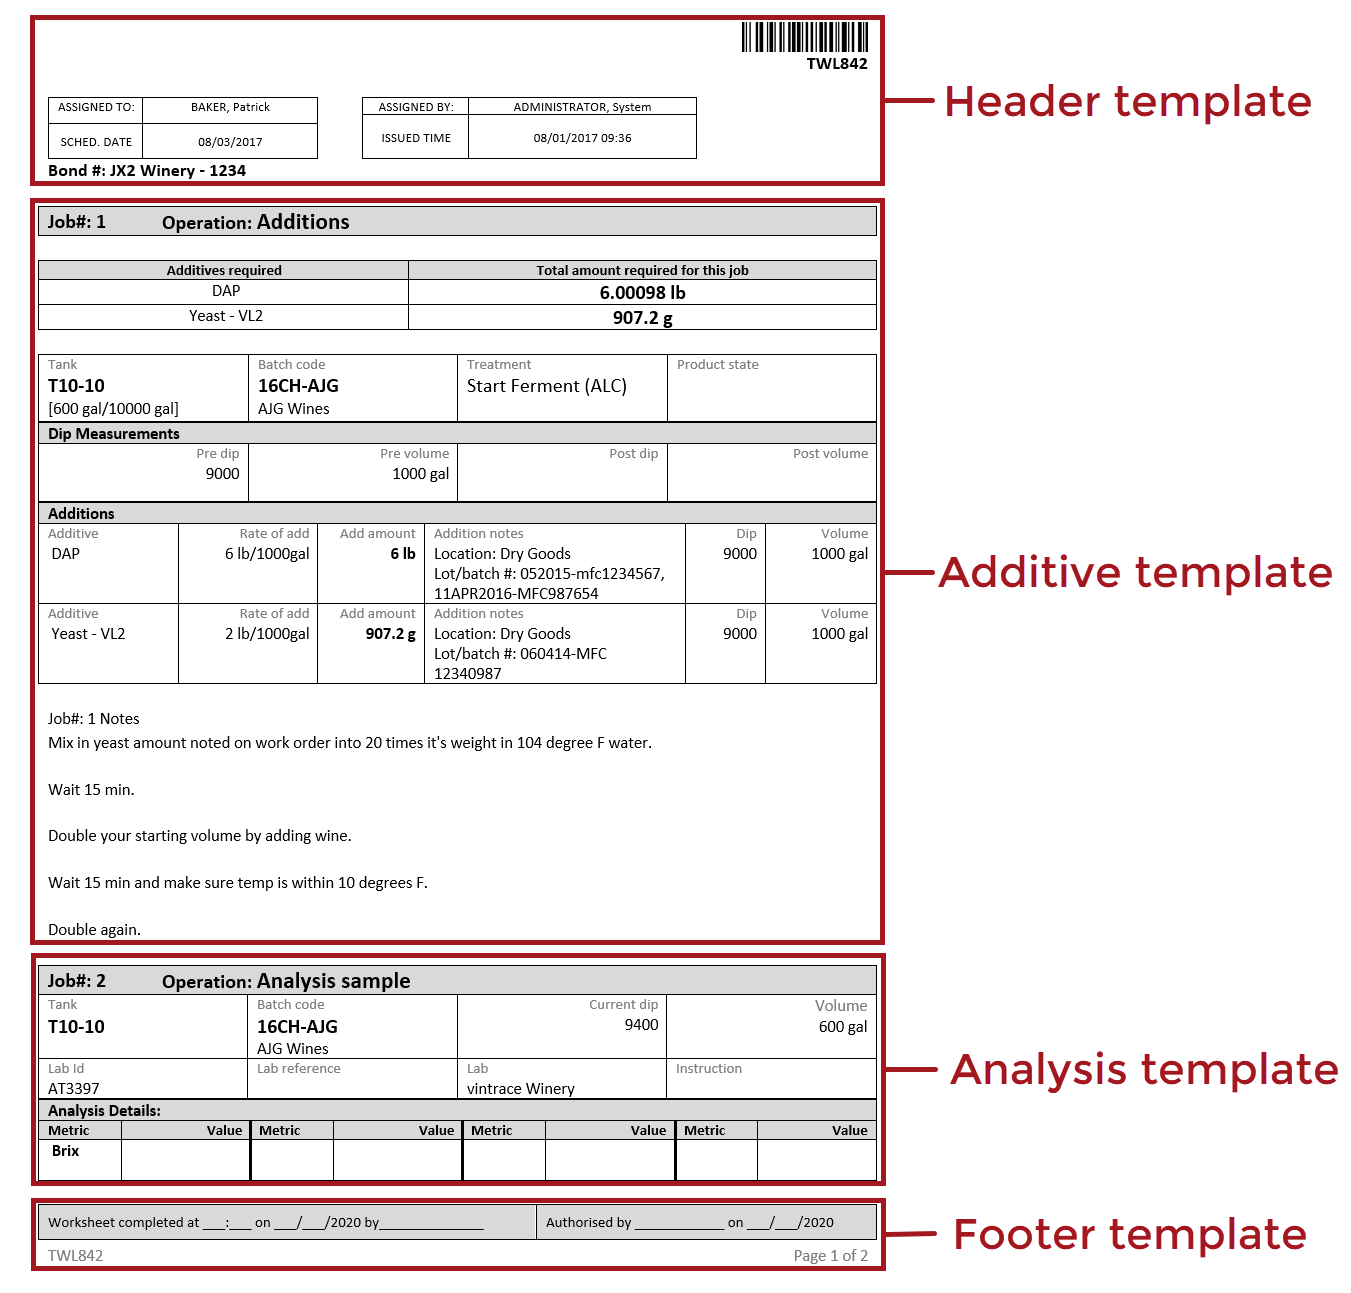 Printed_Work_Order_Components_20201113.png